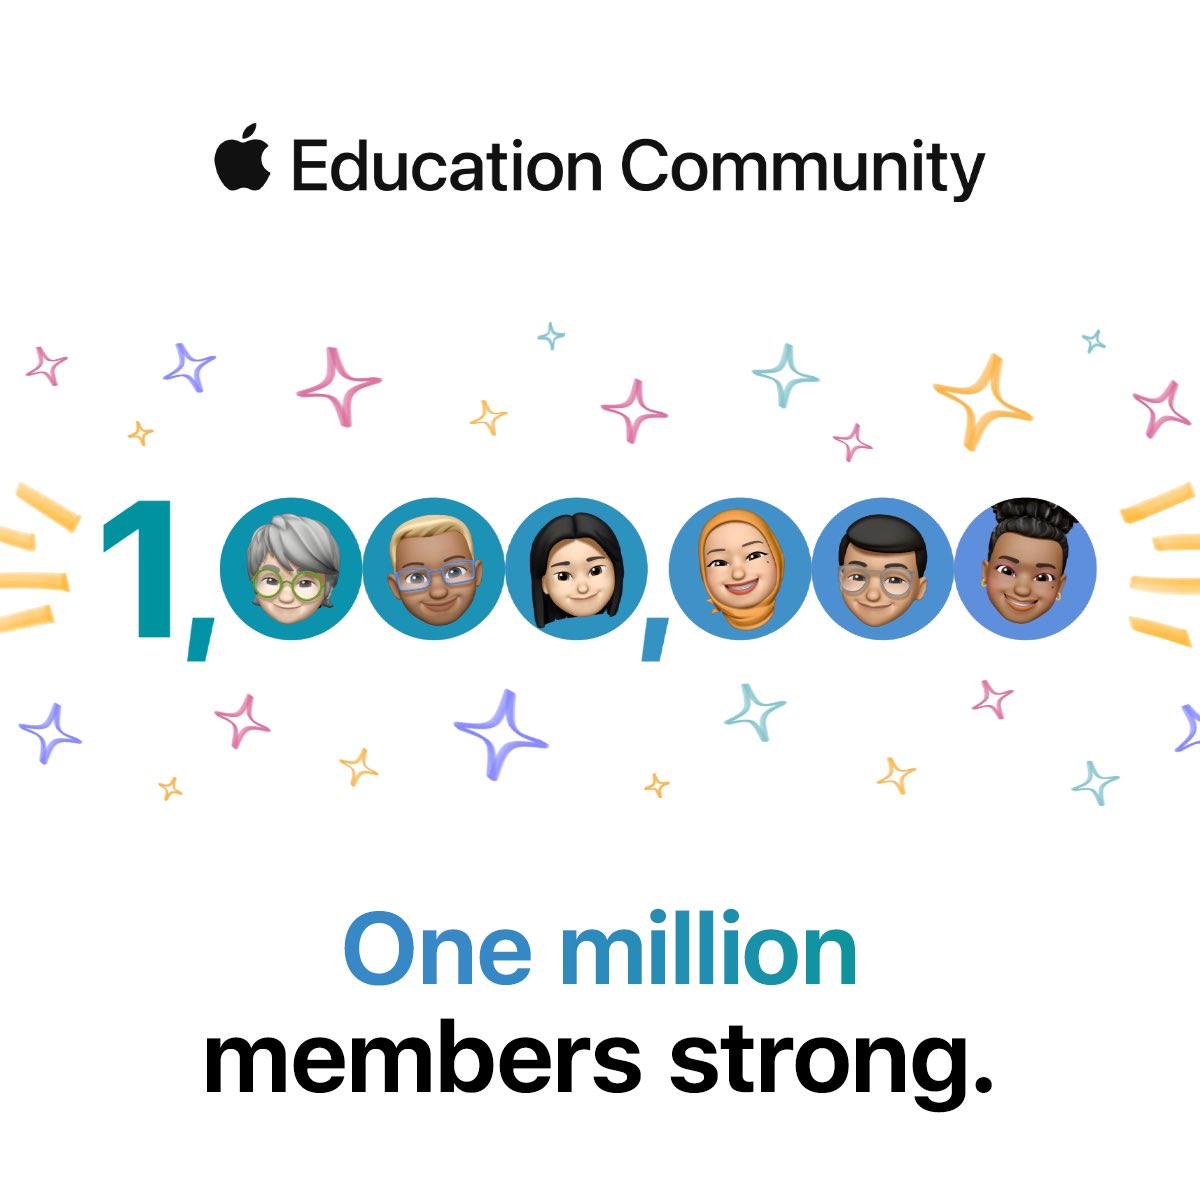 Learn. Share. Be inspired. 💡✨ 

The #AppleEduCommunity is my go-to online resource! 
I’m proud to be part of an educational community of over 1,000,000 teachers & leaders! 🌟 

🔗 Join today: apple.co/educommunity1mm

#AppleTeacher #AppleLearningCoach #AppleDistinguishedEducator